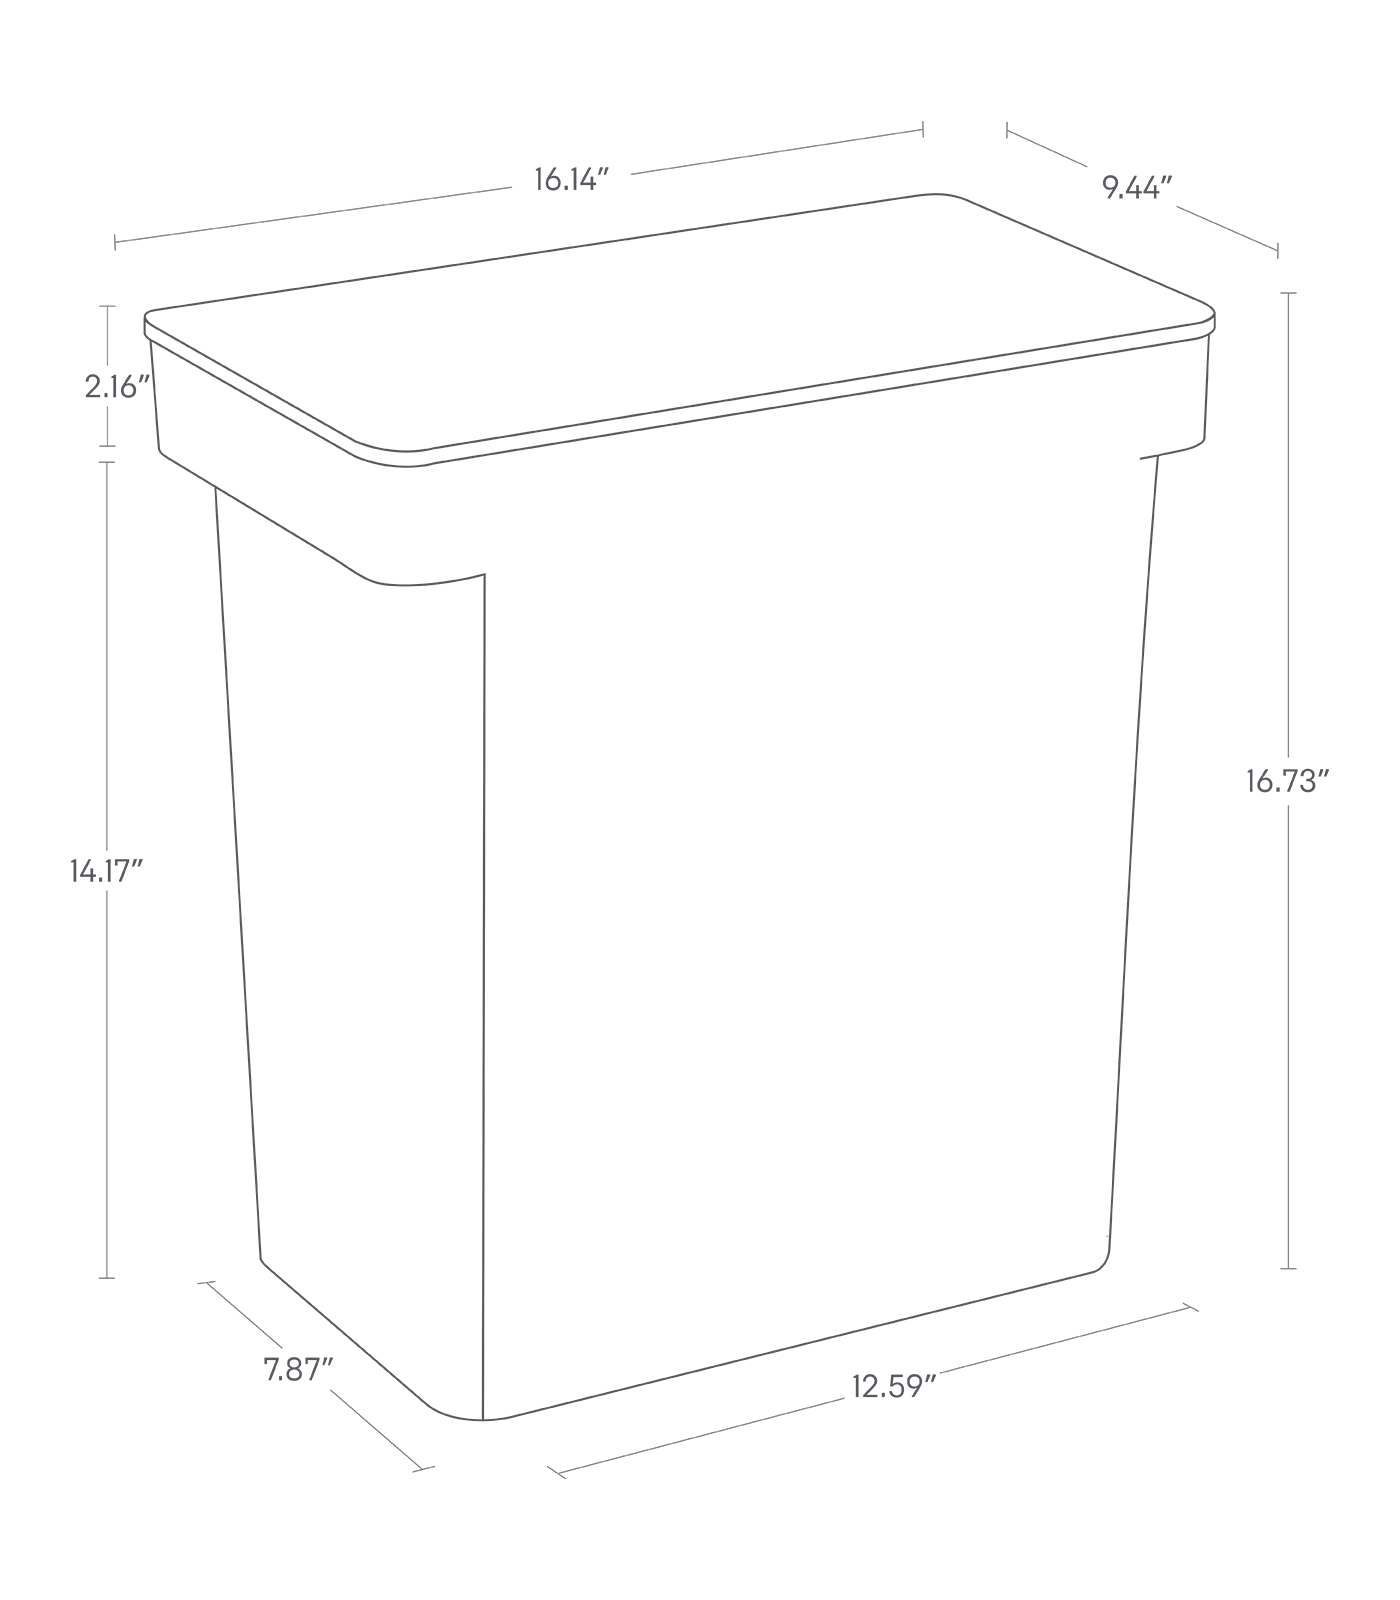 Dimension image for Airtight Rolling Trash Can on a white background including dimensions  L 9.45 x W 16.14 x H 16.73 inches